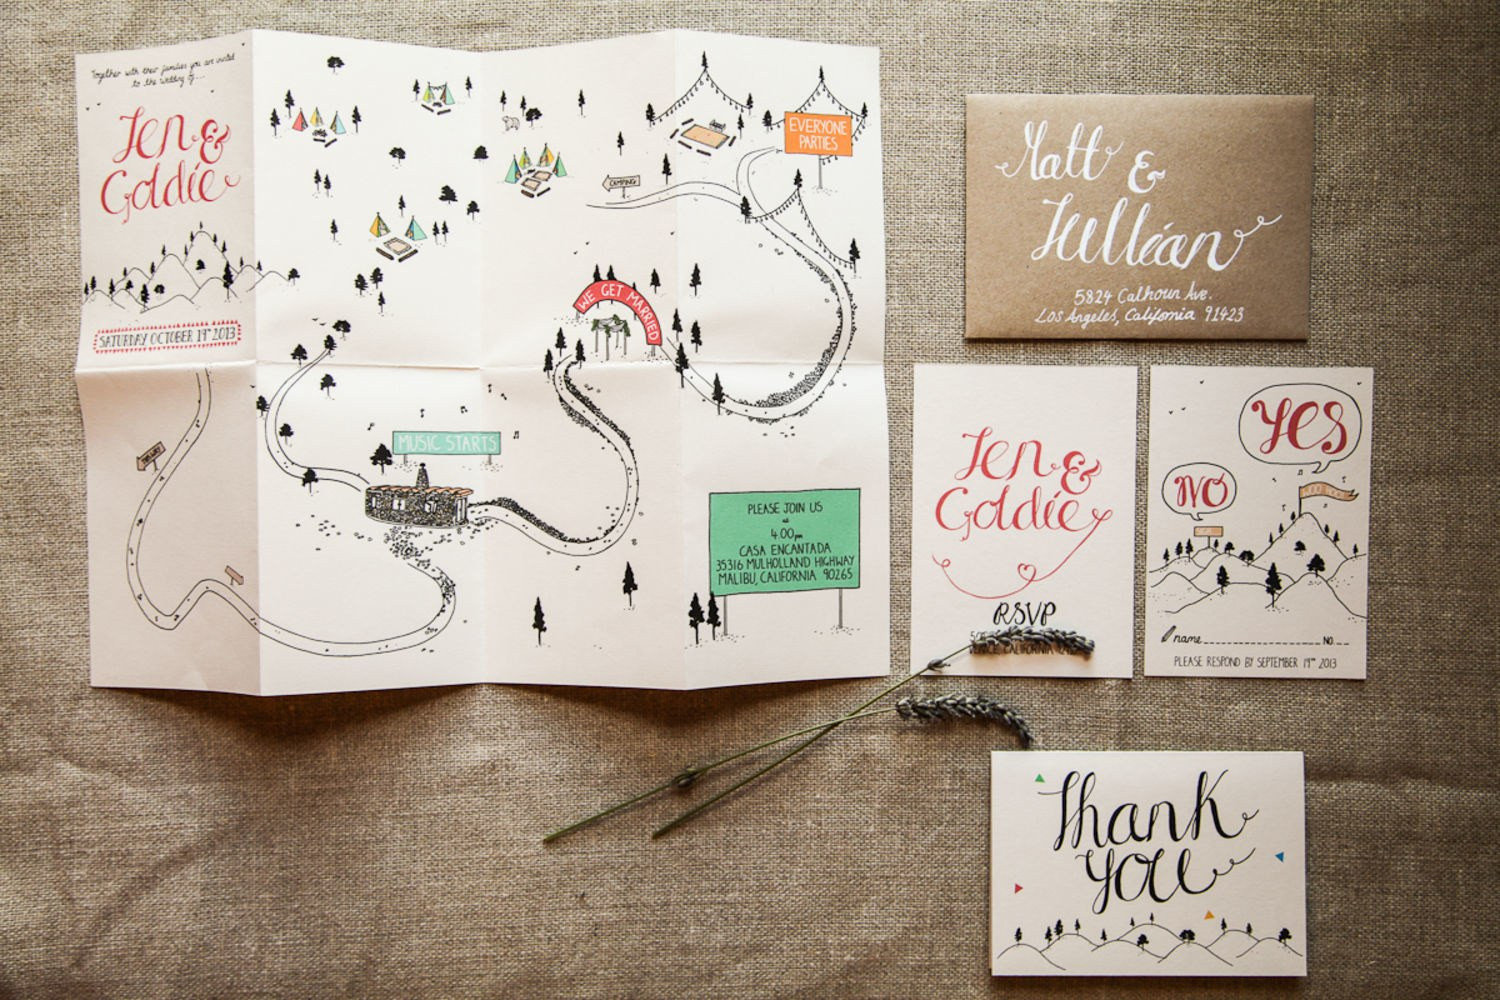 Awesome Wedding Invitations
 An Amazing Wedding Invitation Idea for the Unconventional